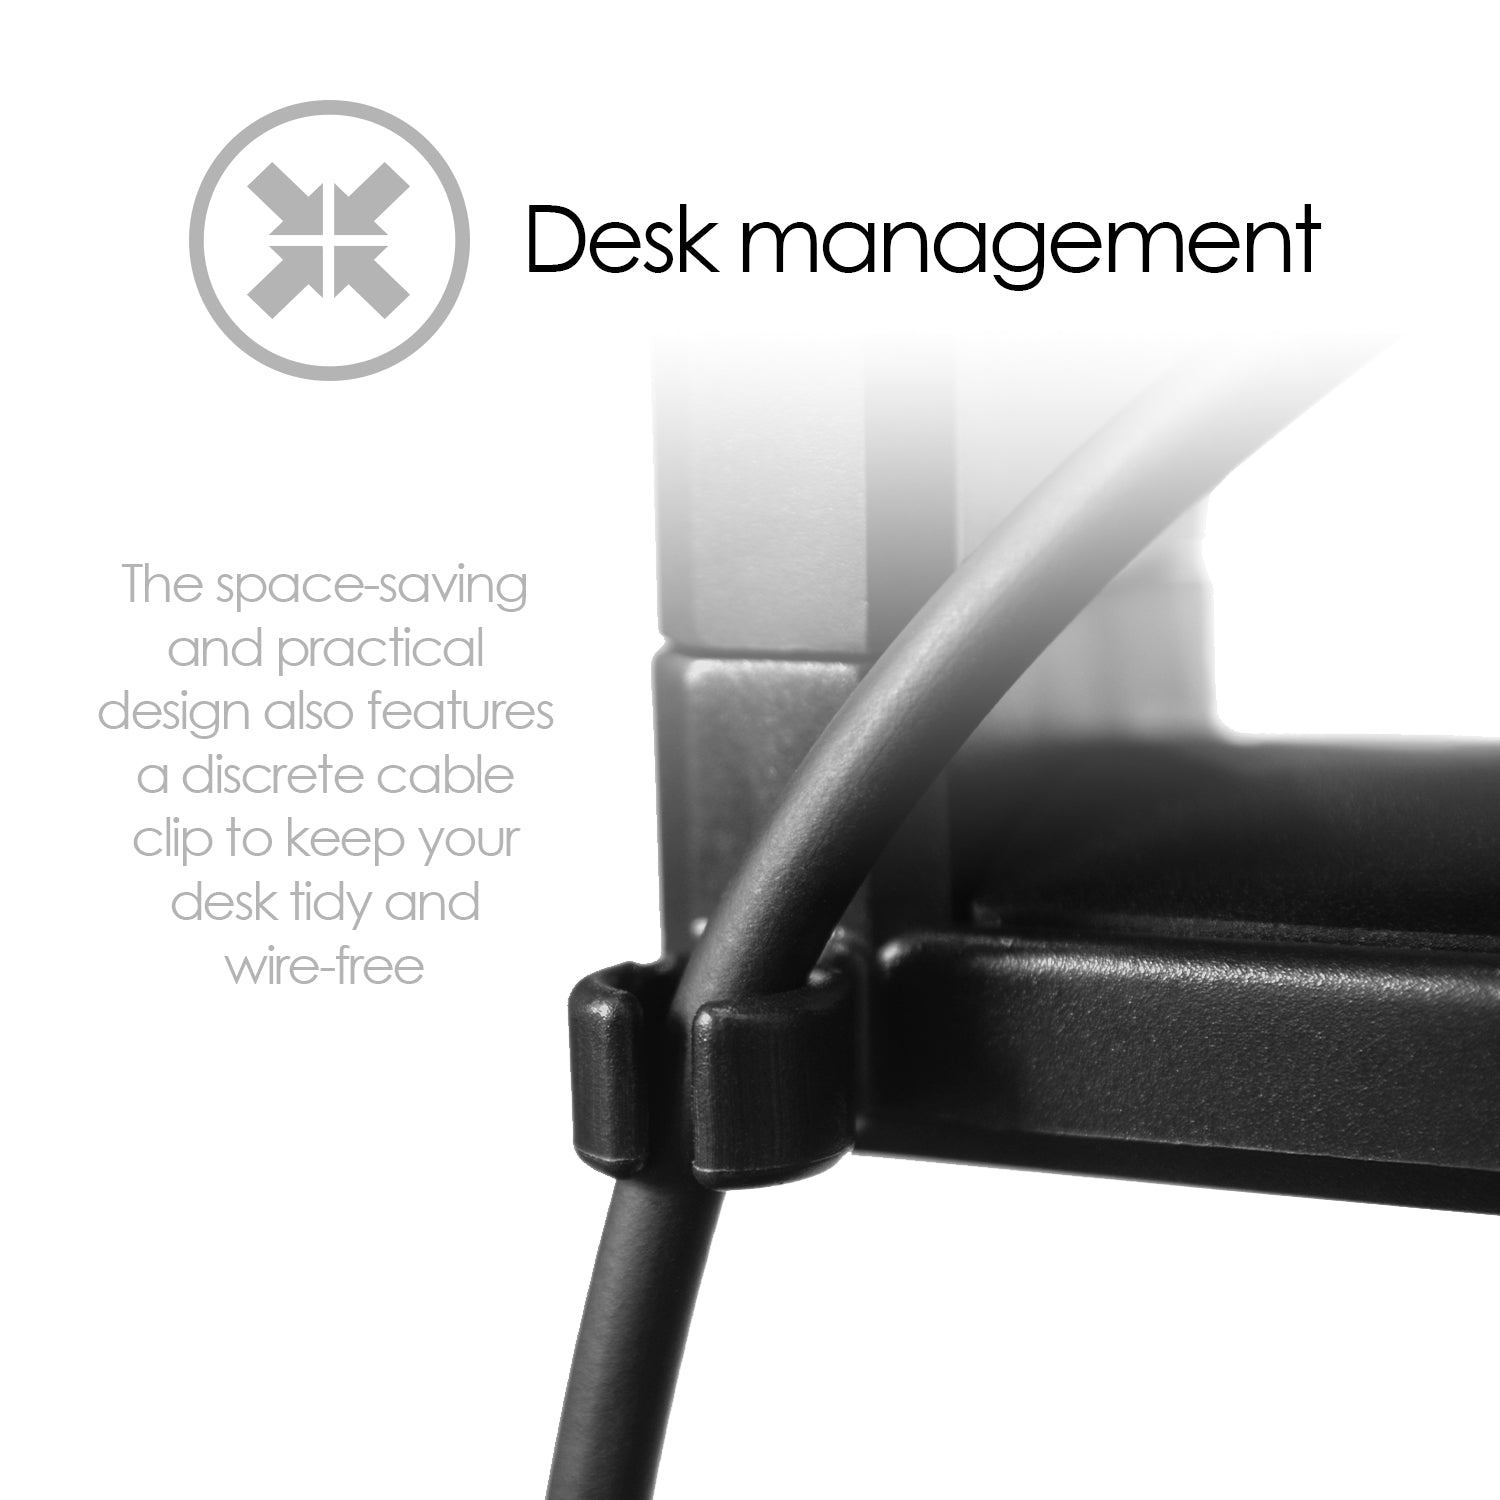 Space saving and practical design features a discrete cable clip to keep your desk tidy and wire free